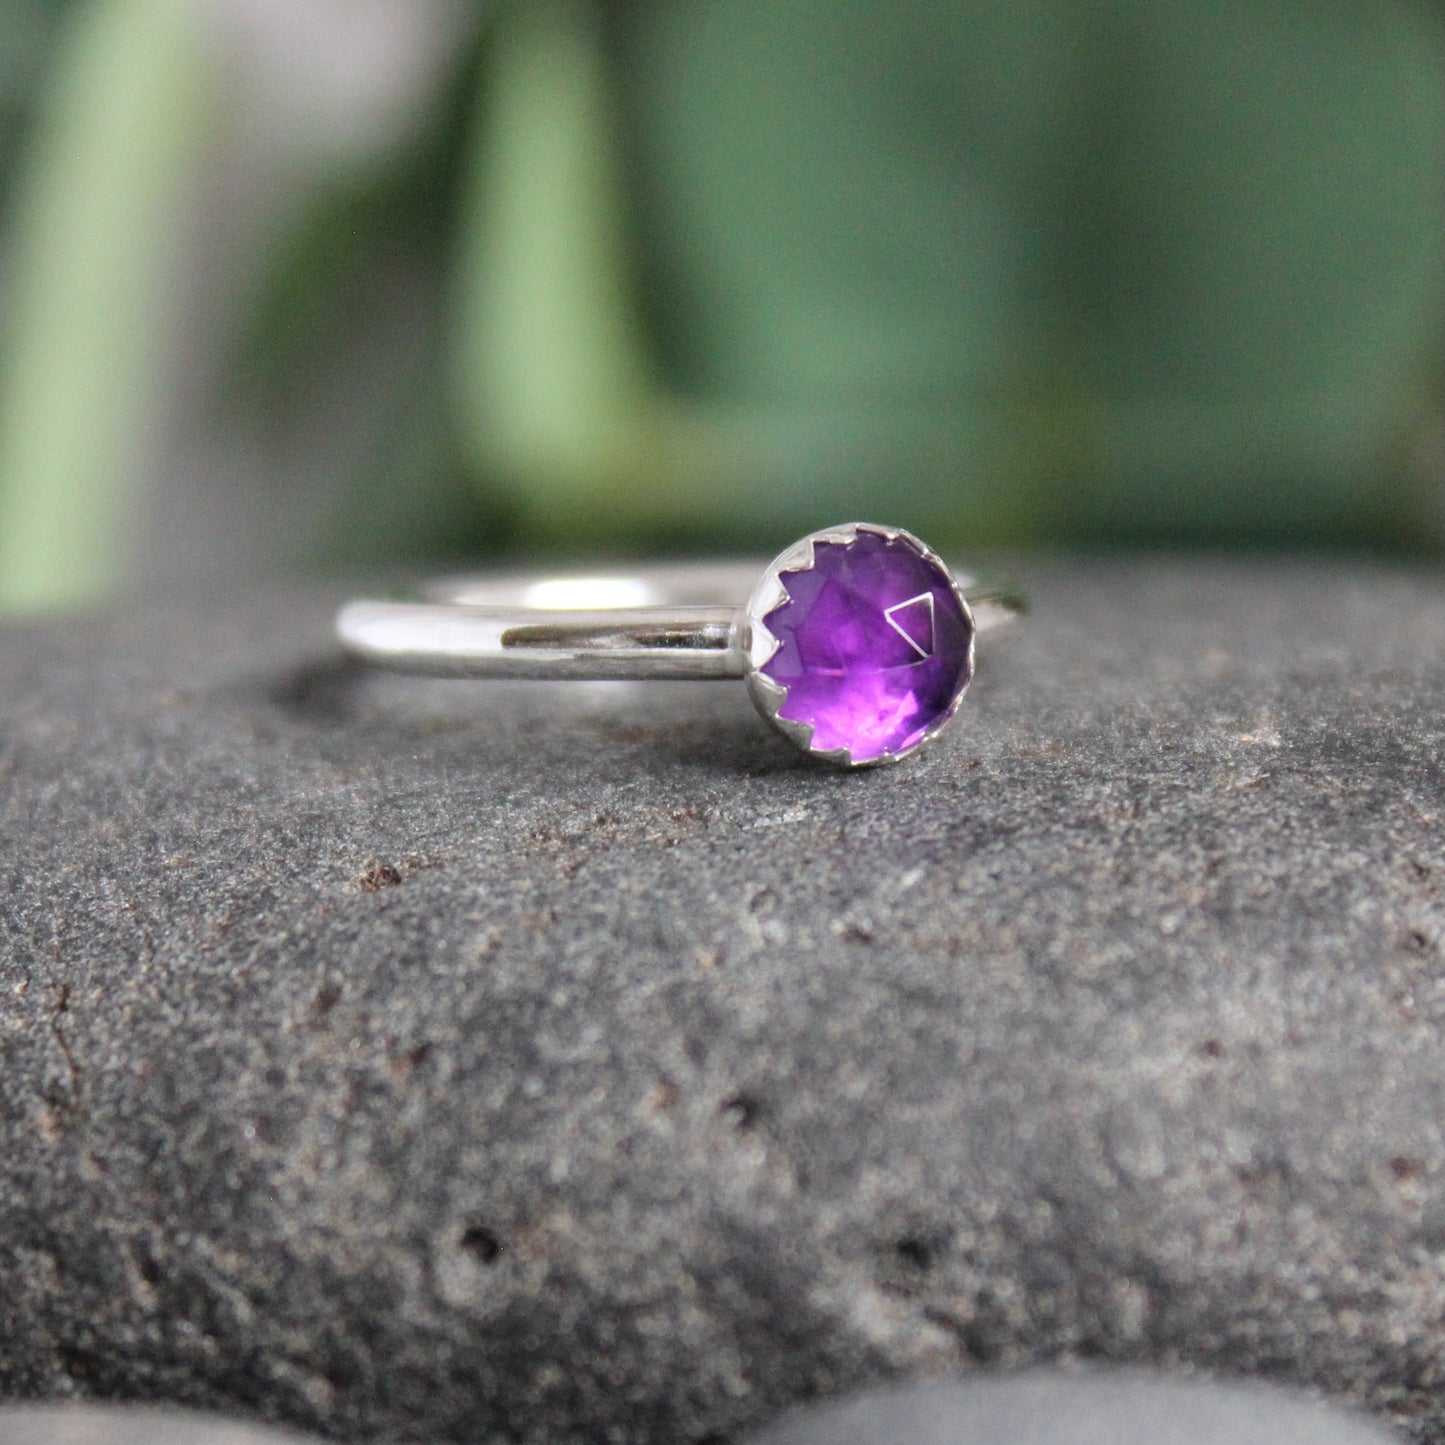 This is a 6mm rose cut round amethyst cabochon set in a sterling silver bezel setting on a sturdy silver band. 